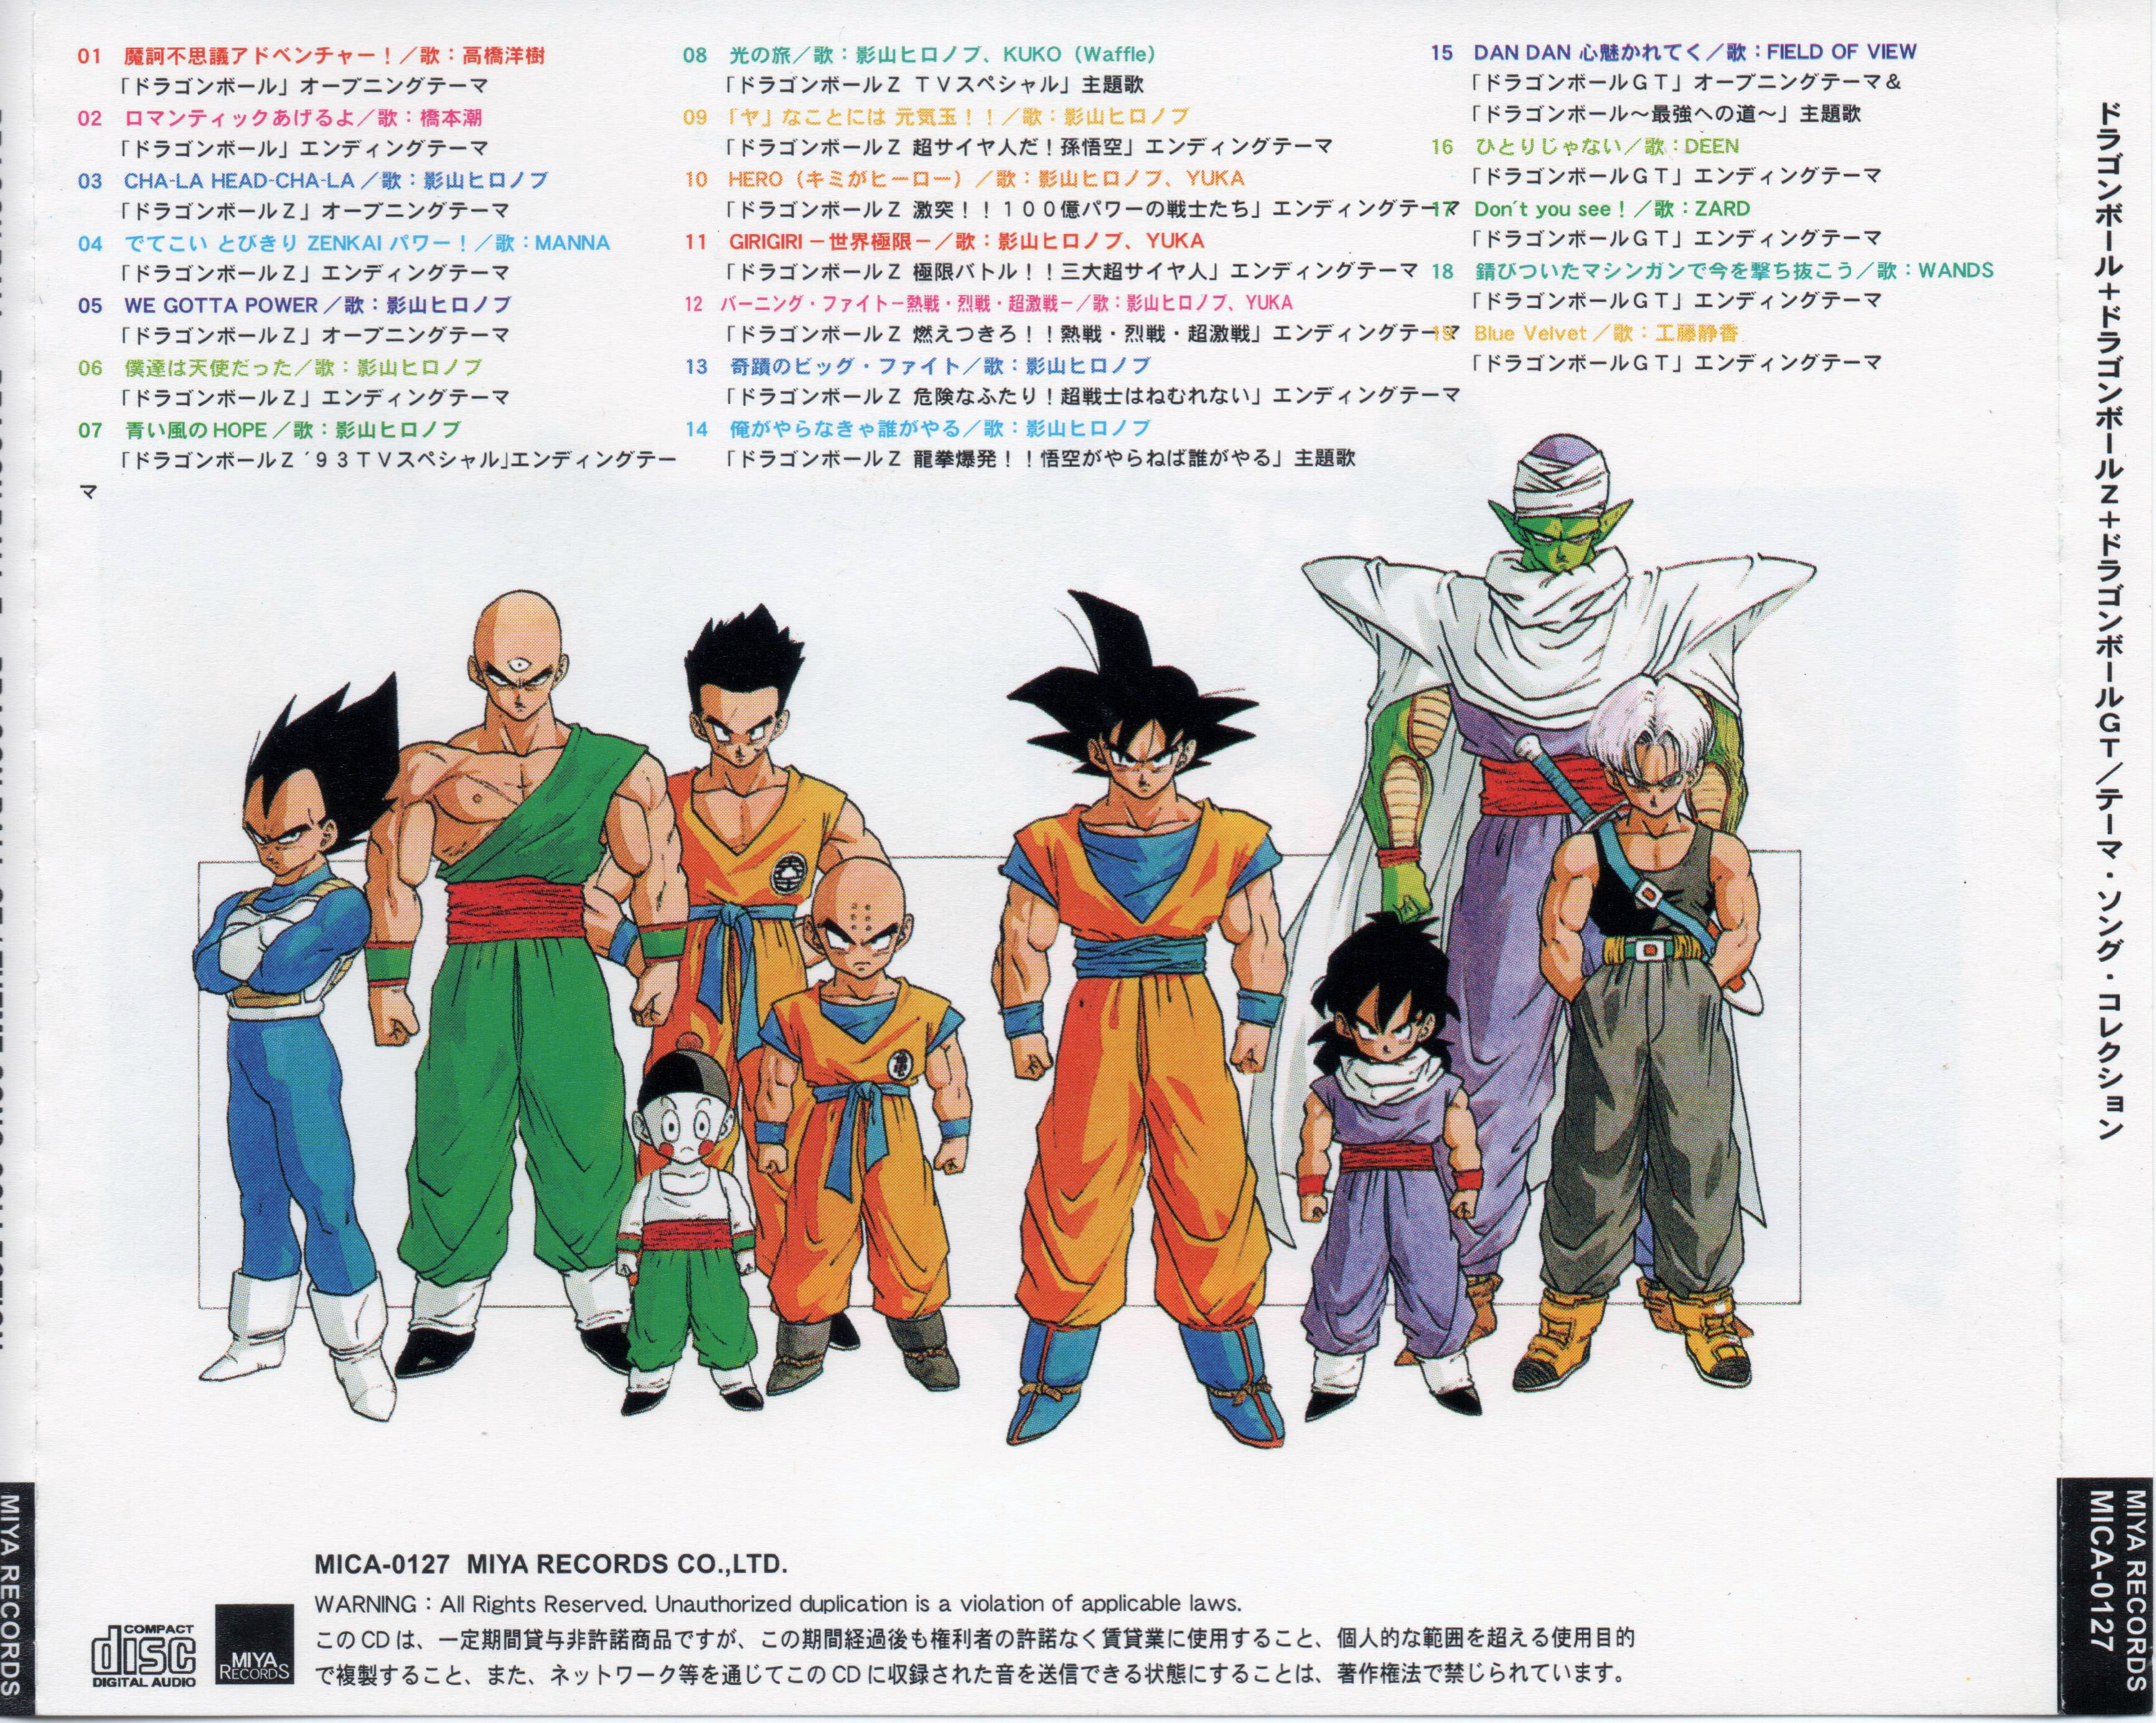 DRAGON BALL + DRAGON BALL Z + DRAGON BALL GT THEME SONG COLLECTION 